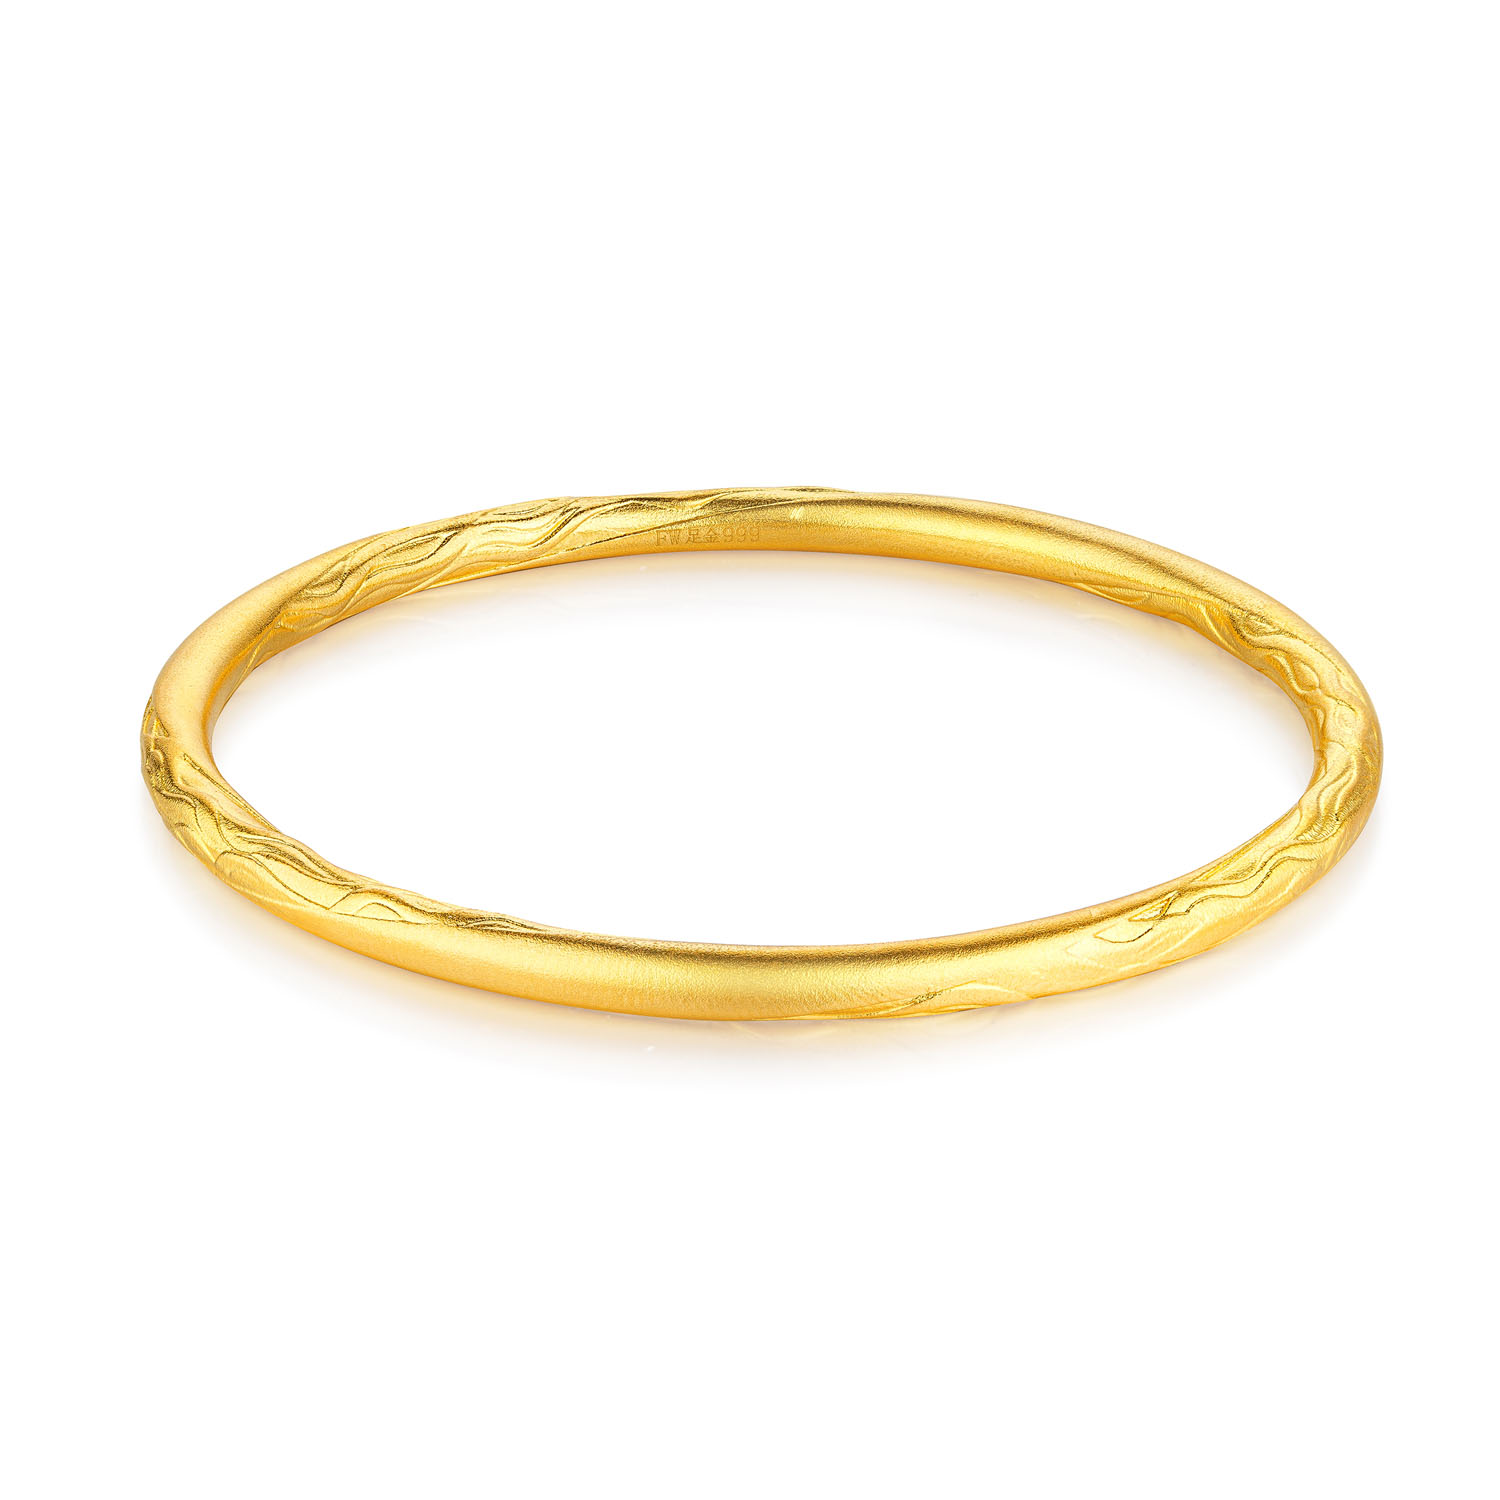 Heirloom Fortune - Charm of Song Dynasty Collection "Landscape" Gold Bangle